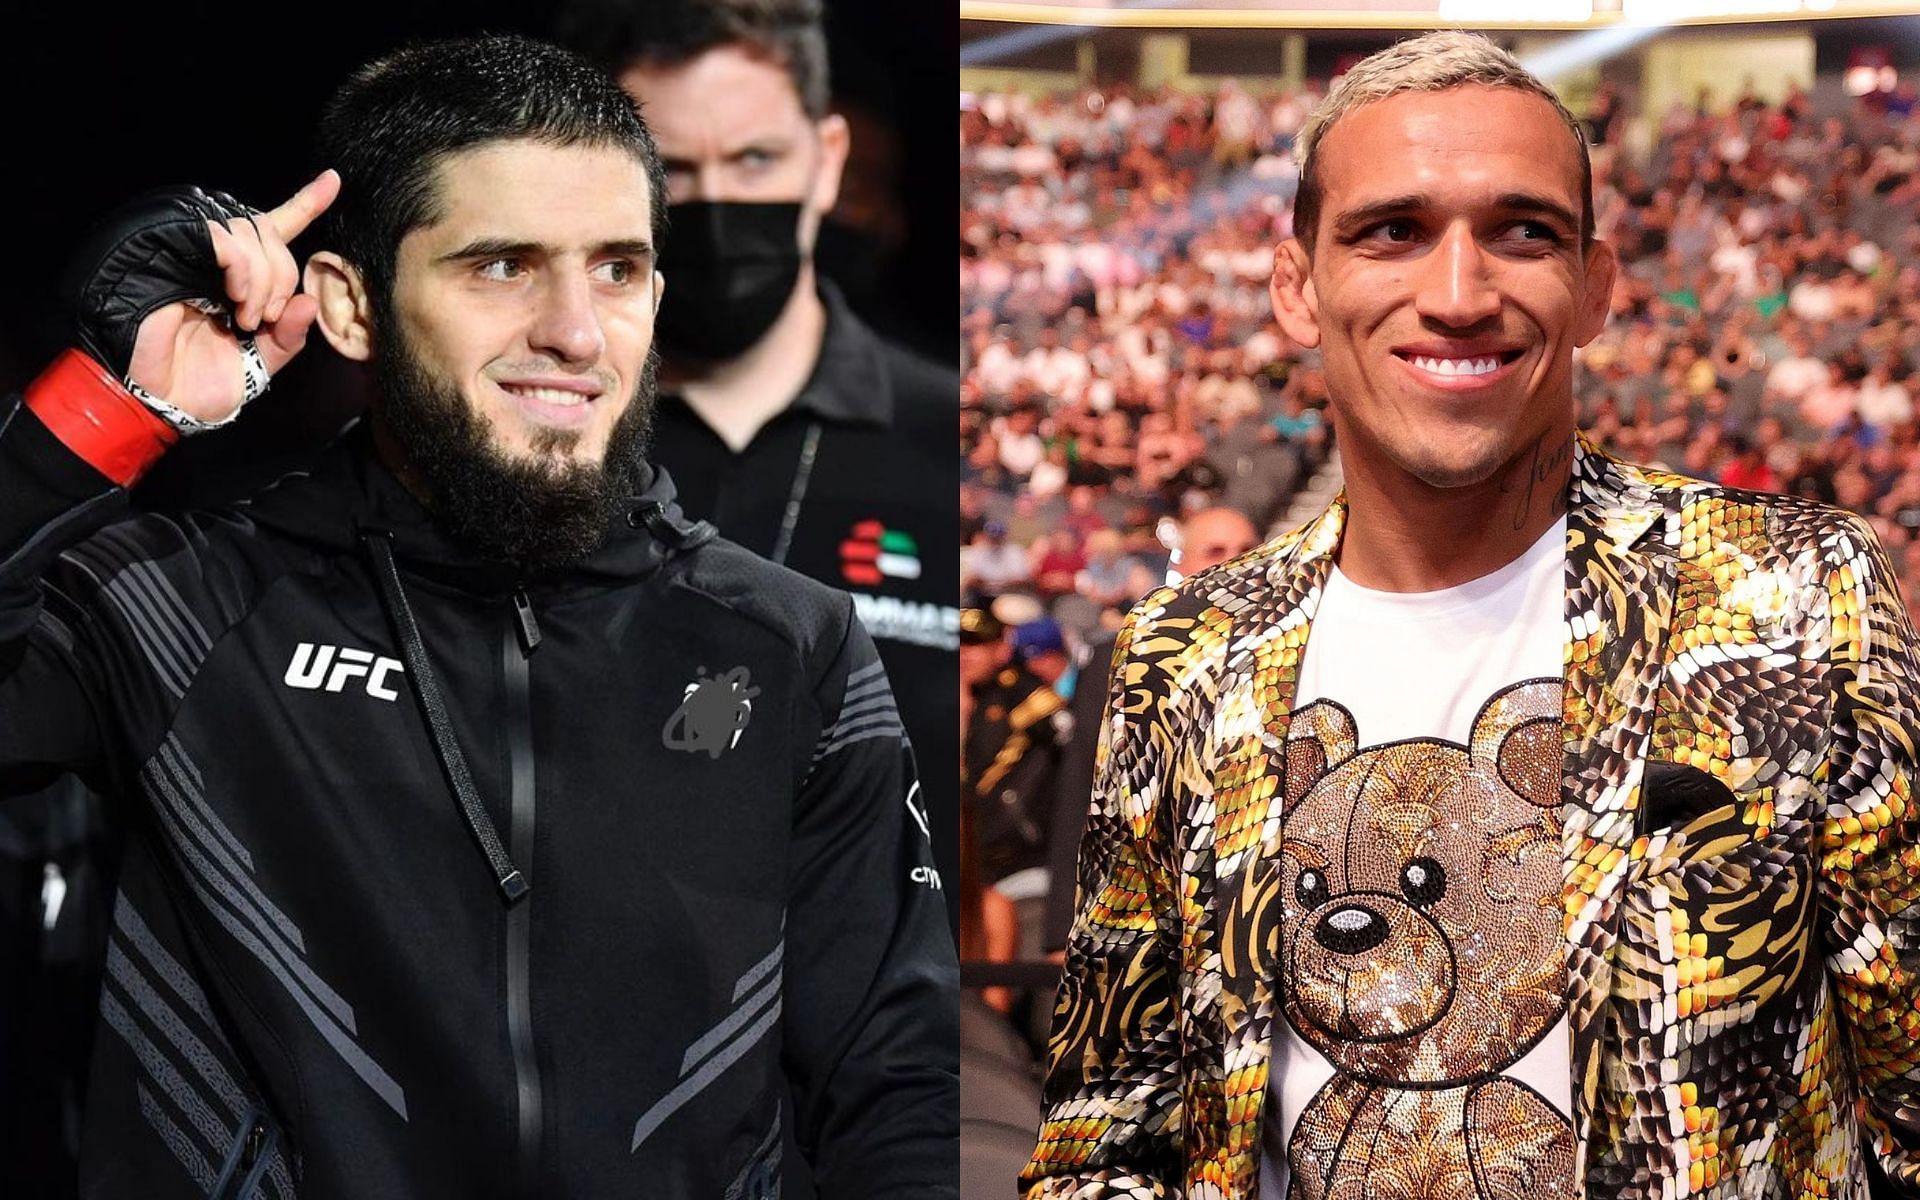 Islam Makhachev (left) and Charles Oliveira (right) [Photo credit: @ufc on Instagram]